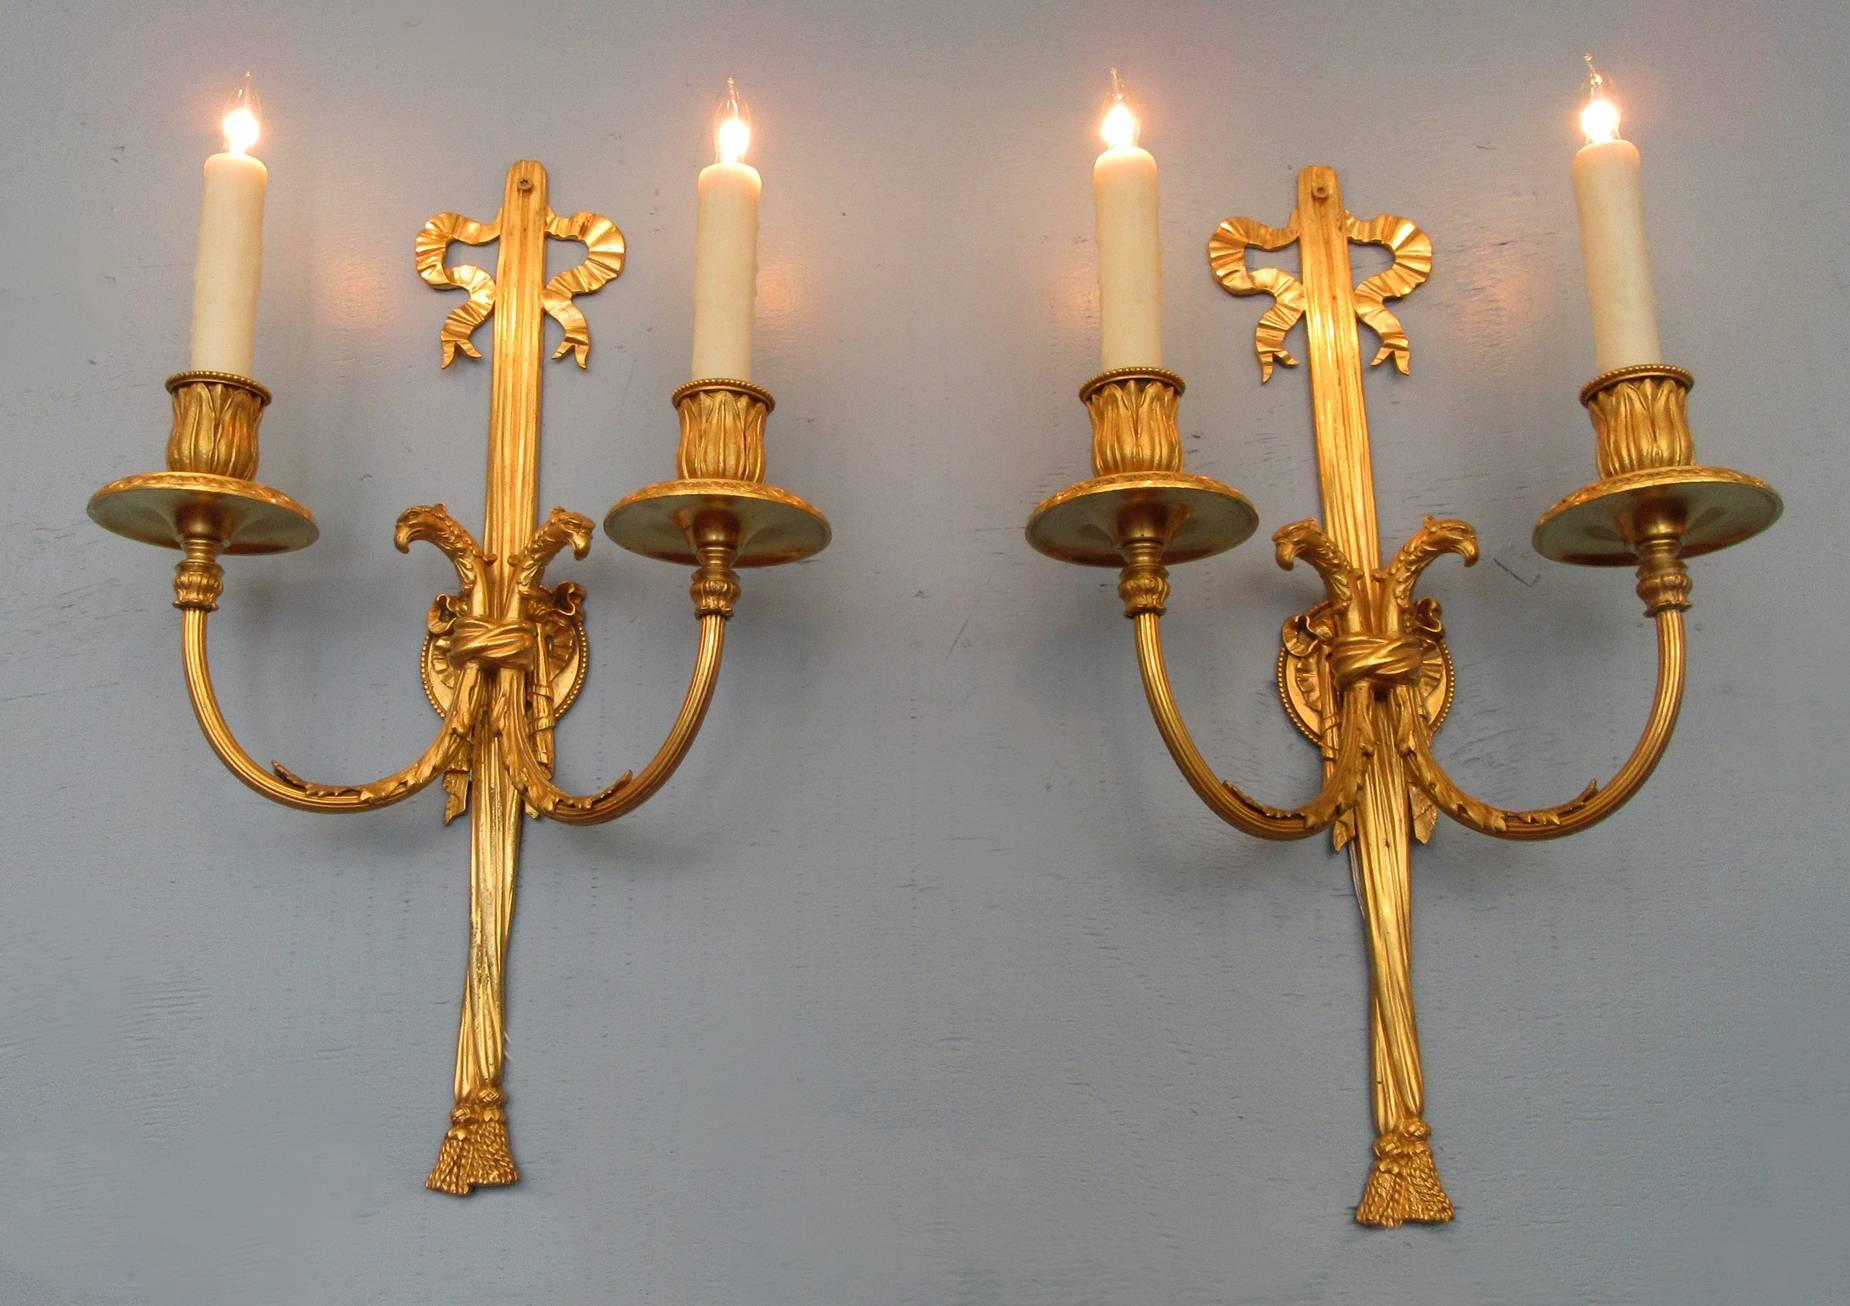 An elegant pair of bronze doré Regence style sconces from New York, circa 1910 and stamped by noted maker Edward F. Caldwell & Co., each featuring two candle arms with ribbon, opposing Ho Ho birds and tassel. The sconces have recently been rewired